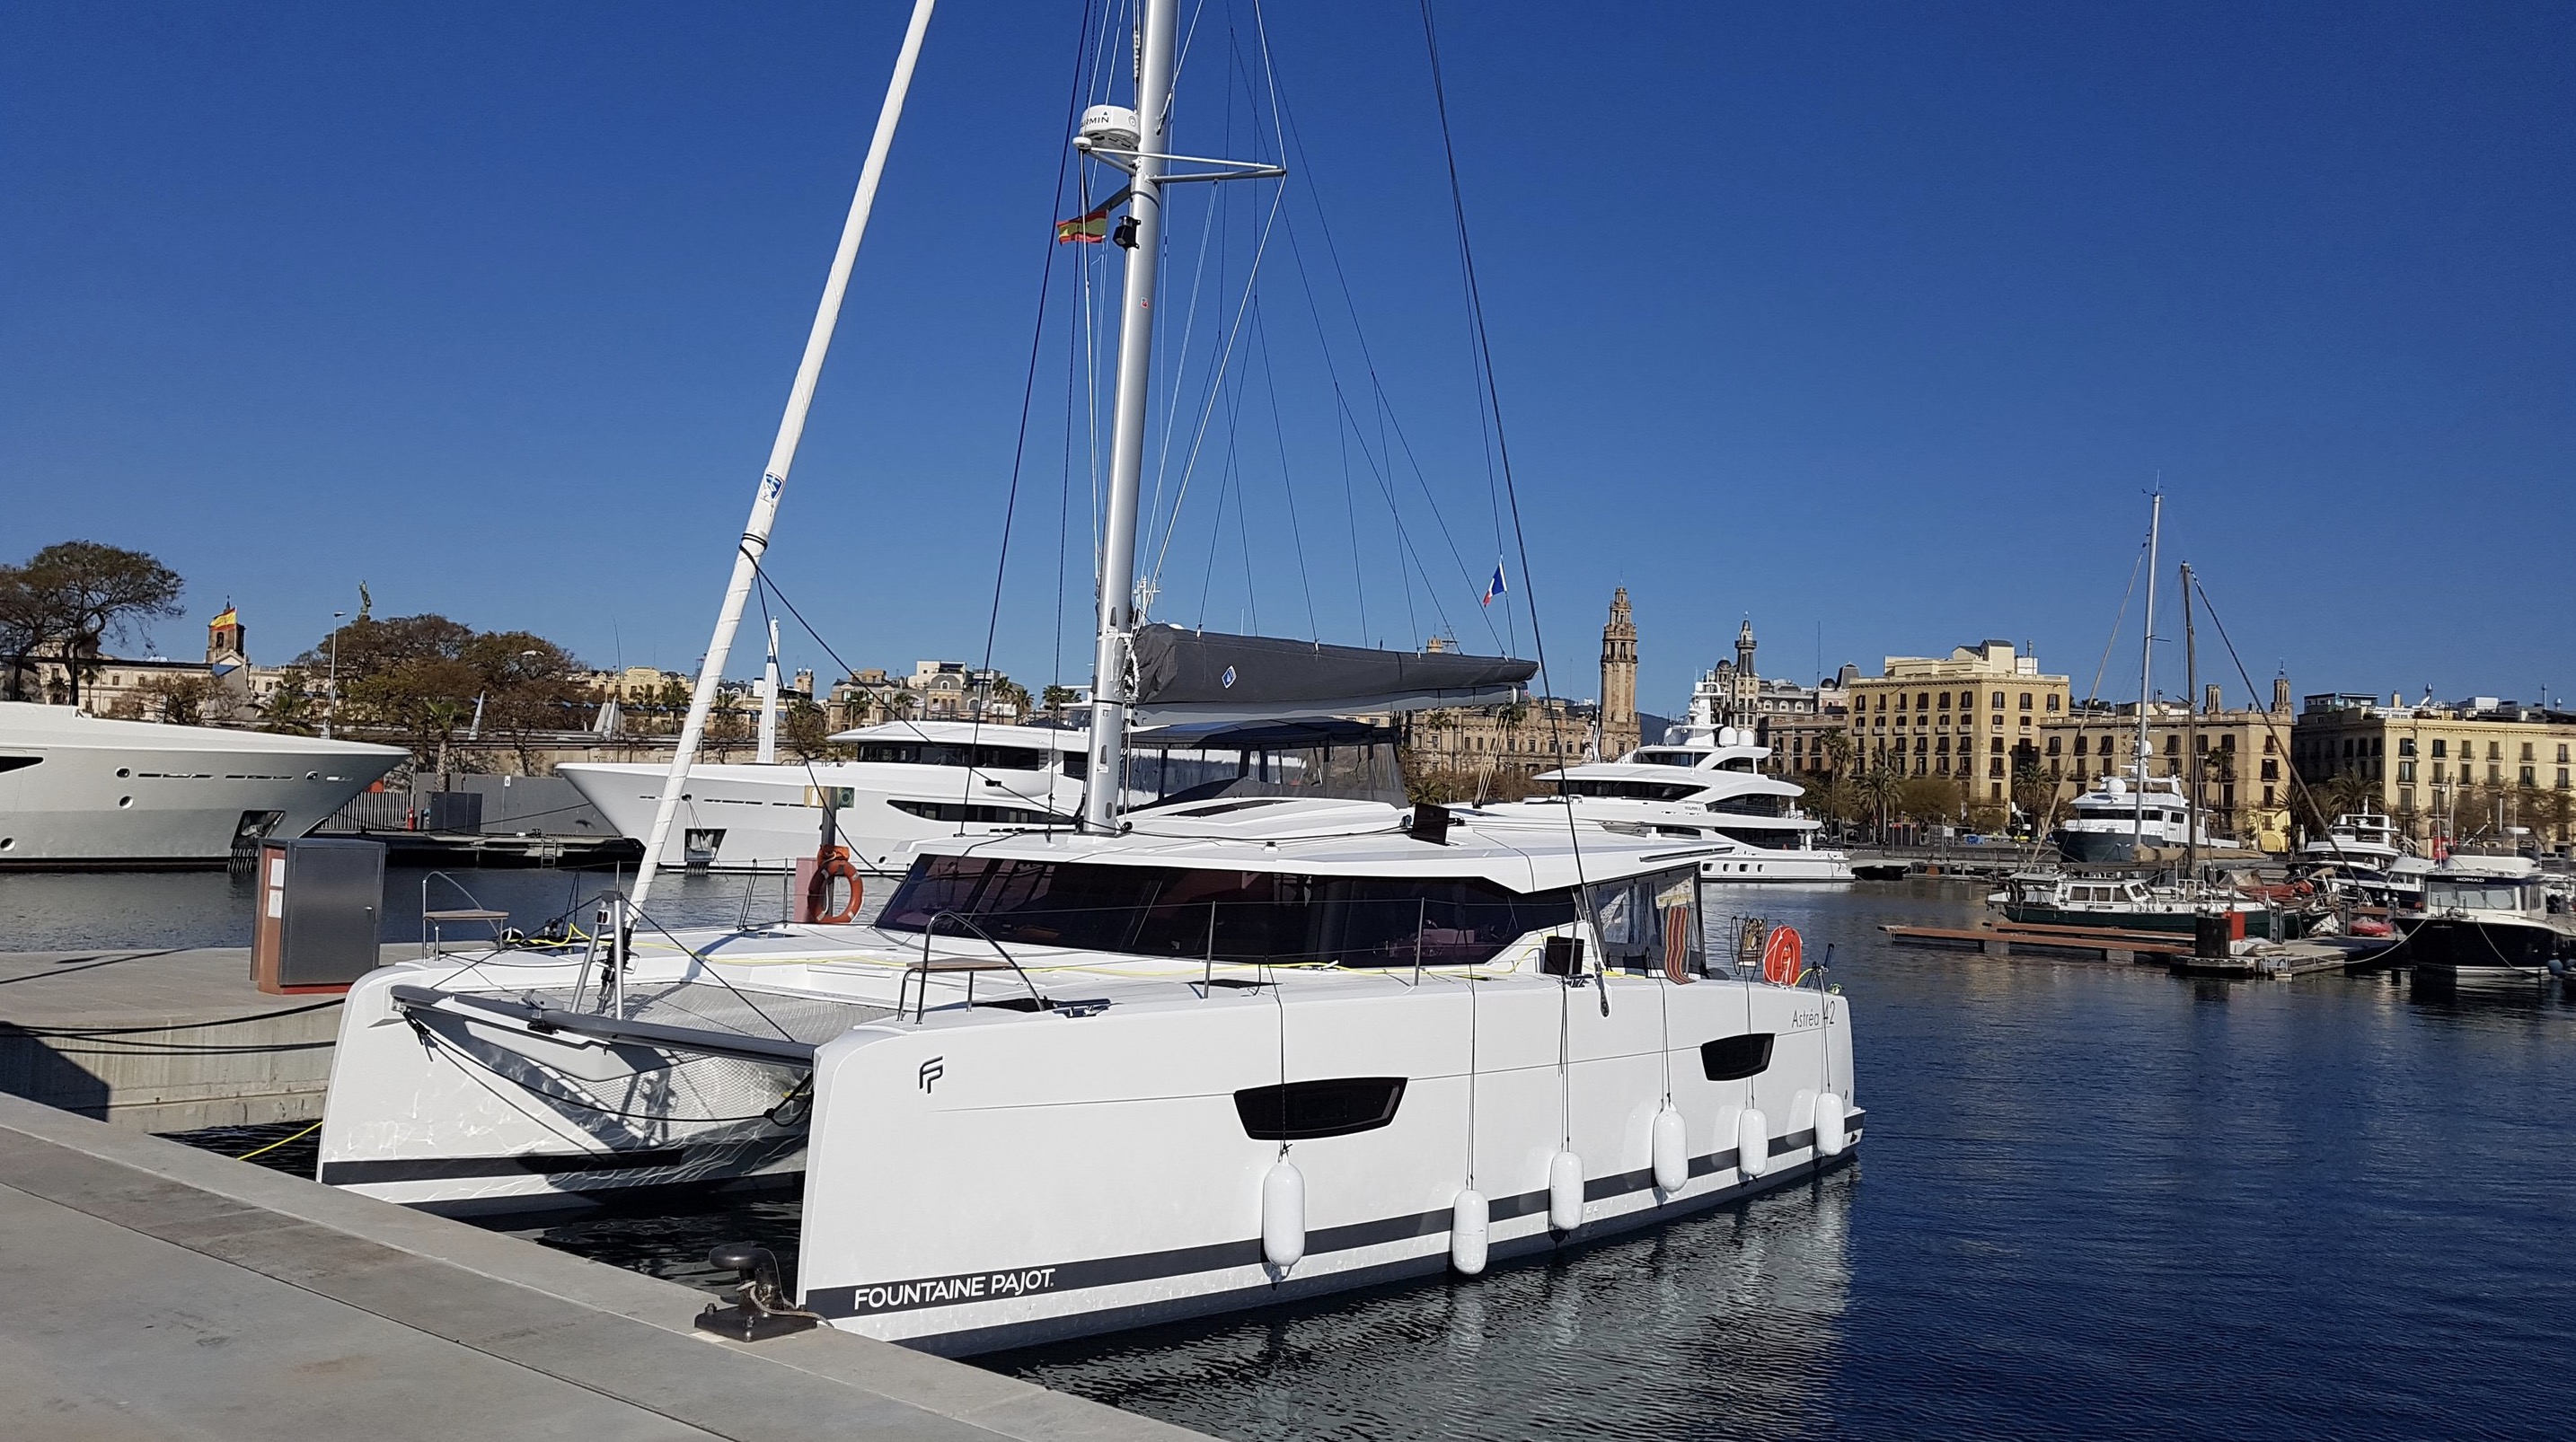 Foutaine Pajot-img1